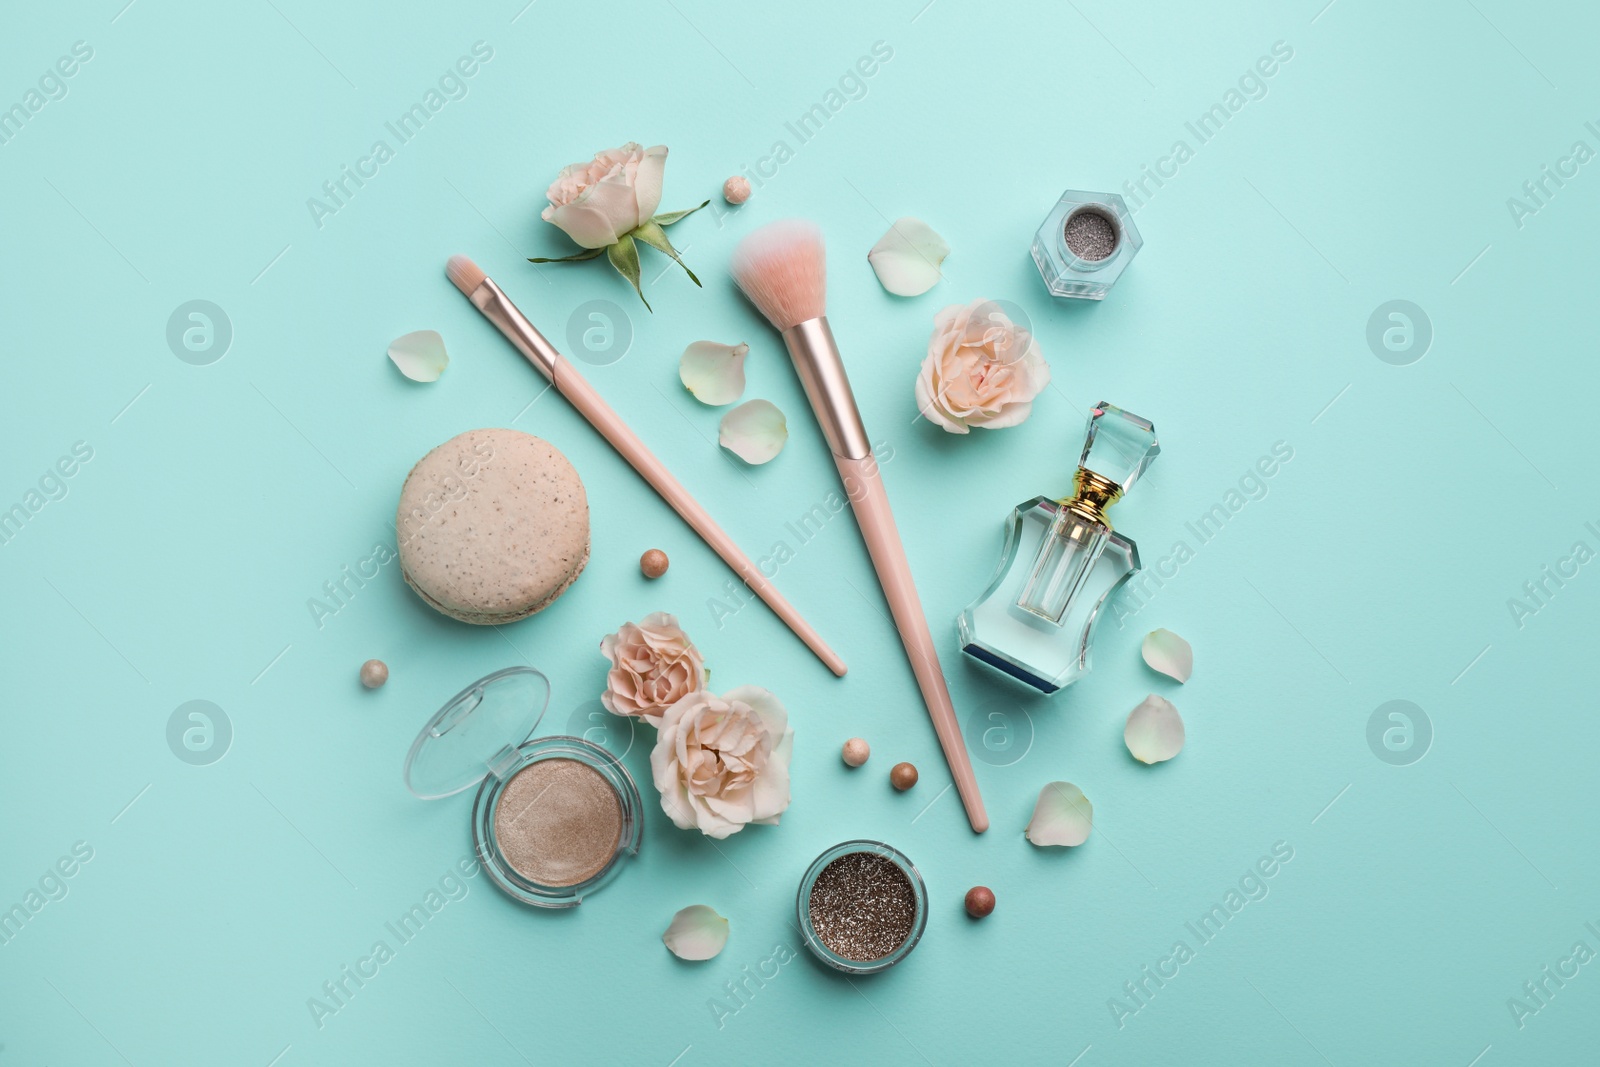 Photo of Flat lay composition with makeup products, roses and macaron on turquoise background